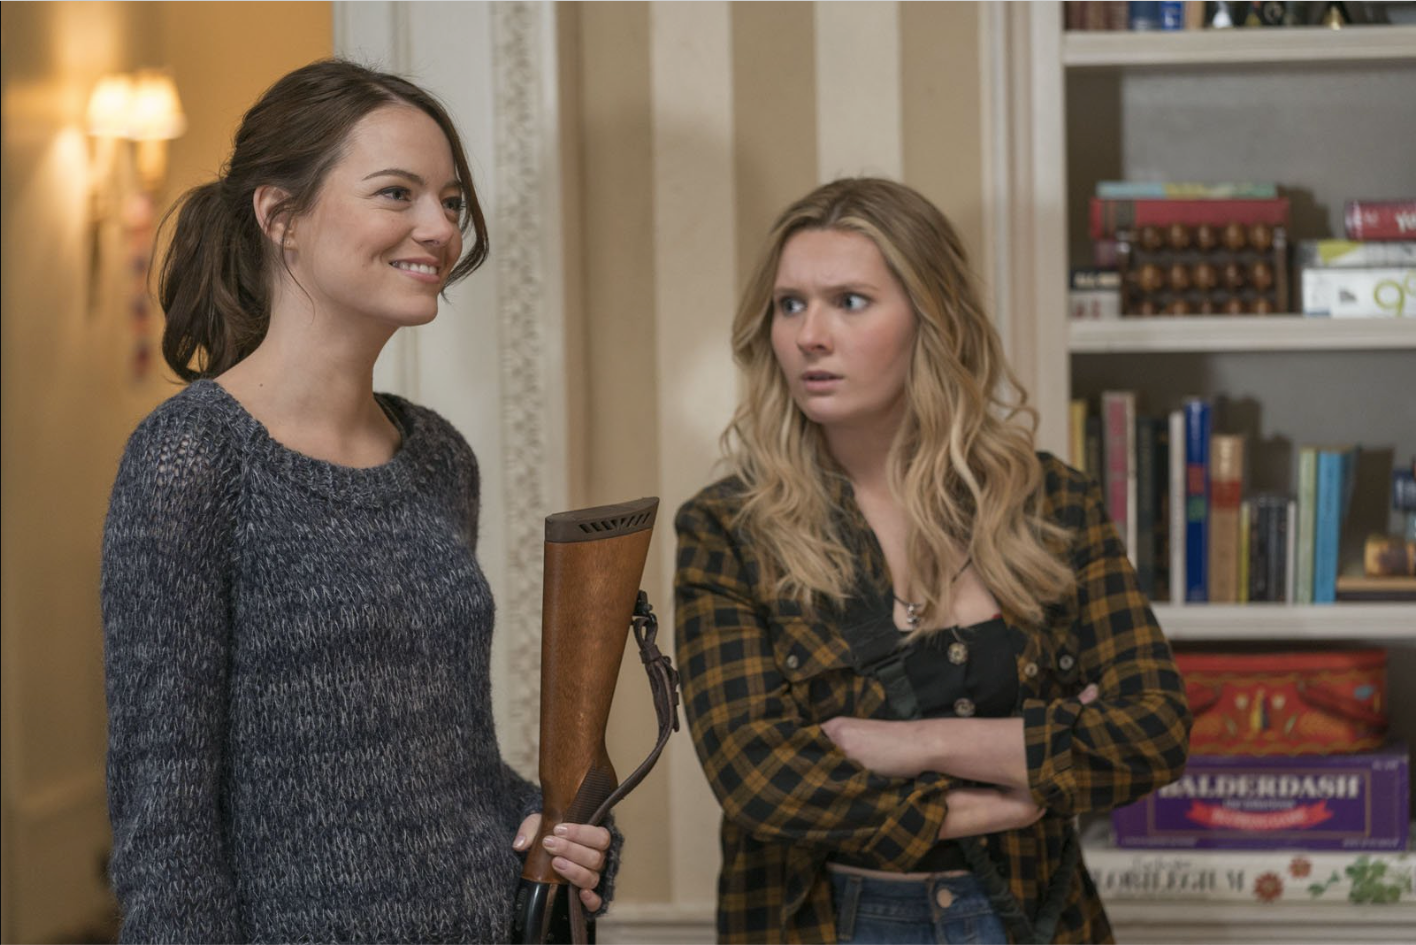 Emma Stone and Abigail Breslin stand in a room together by a bookcase. Emma Stone stands on the left in simple clothing and her hair in a ponytail, holding a rifle and smiling to something or someone off camera. Abigail Breslin stands on the right, looking at Emma Stone with her arms crossed and an incredulous look on her face. 